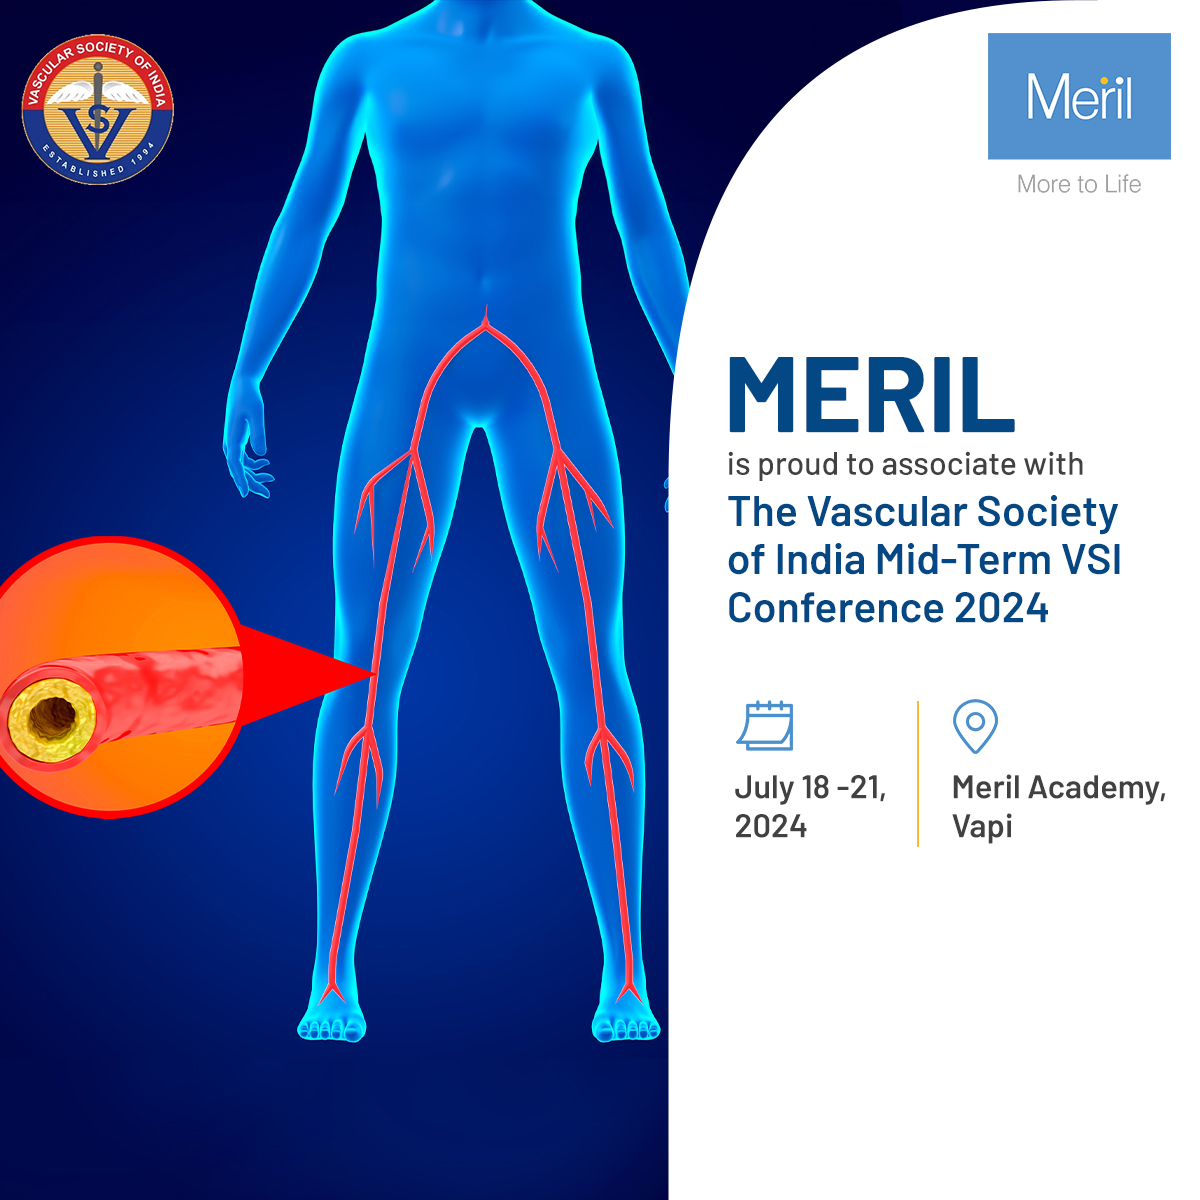 Meril is proud to associate with The Vascular Society of India Mid-Term VSI Conference 2024!